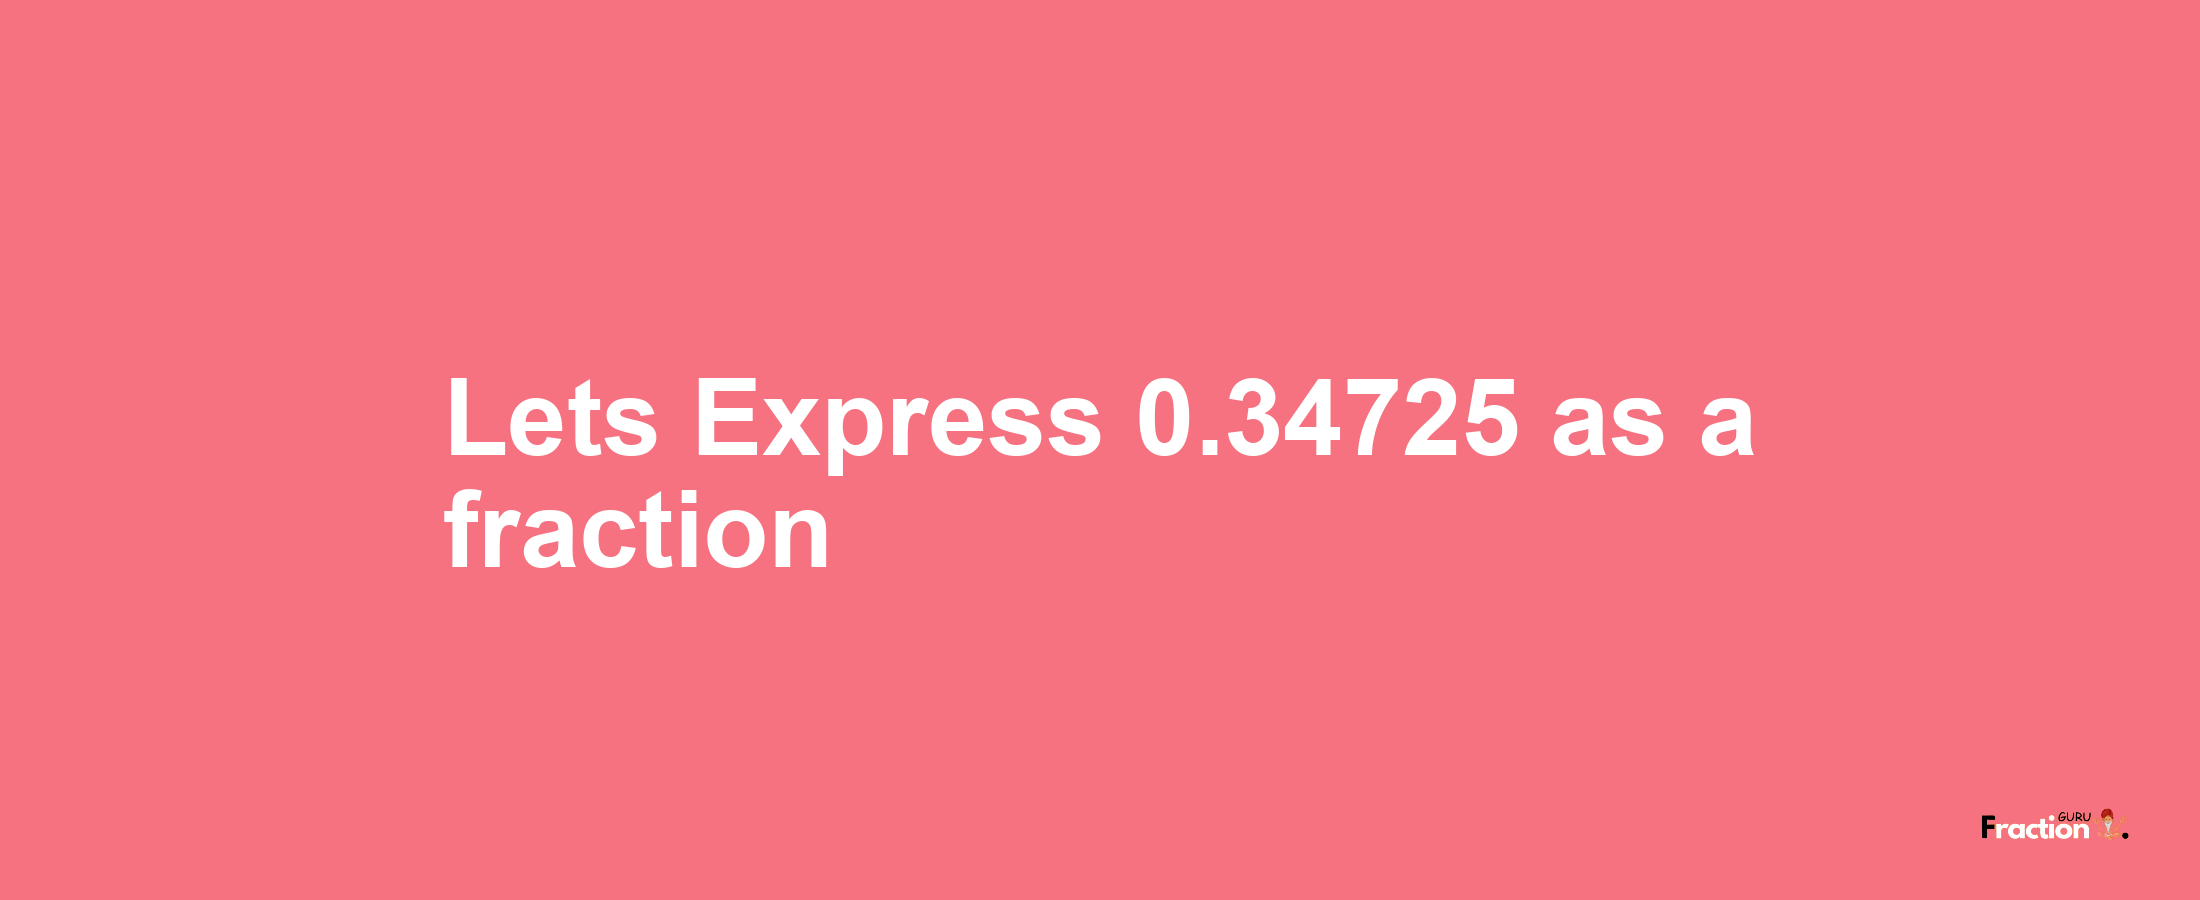 Lets Express 0.34725 as afraction